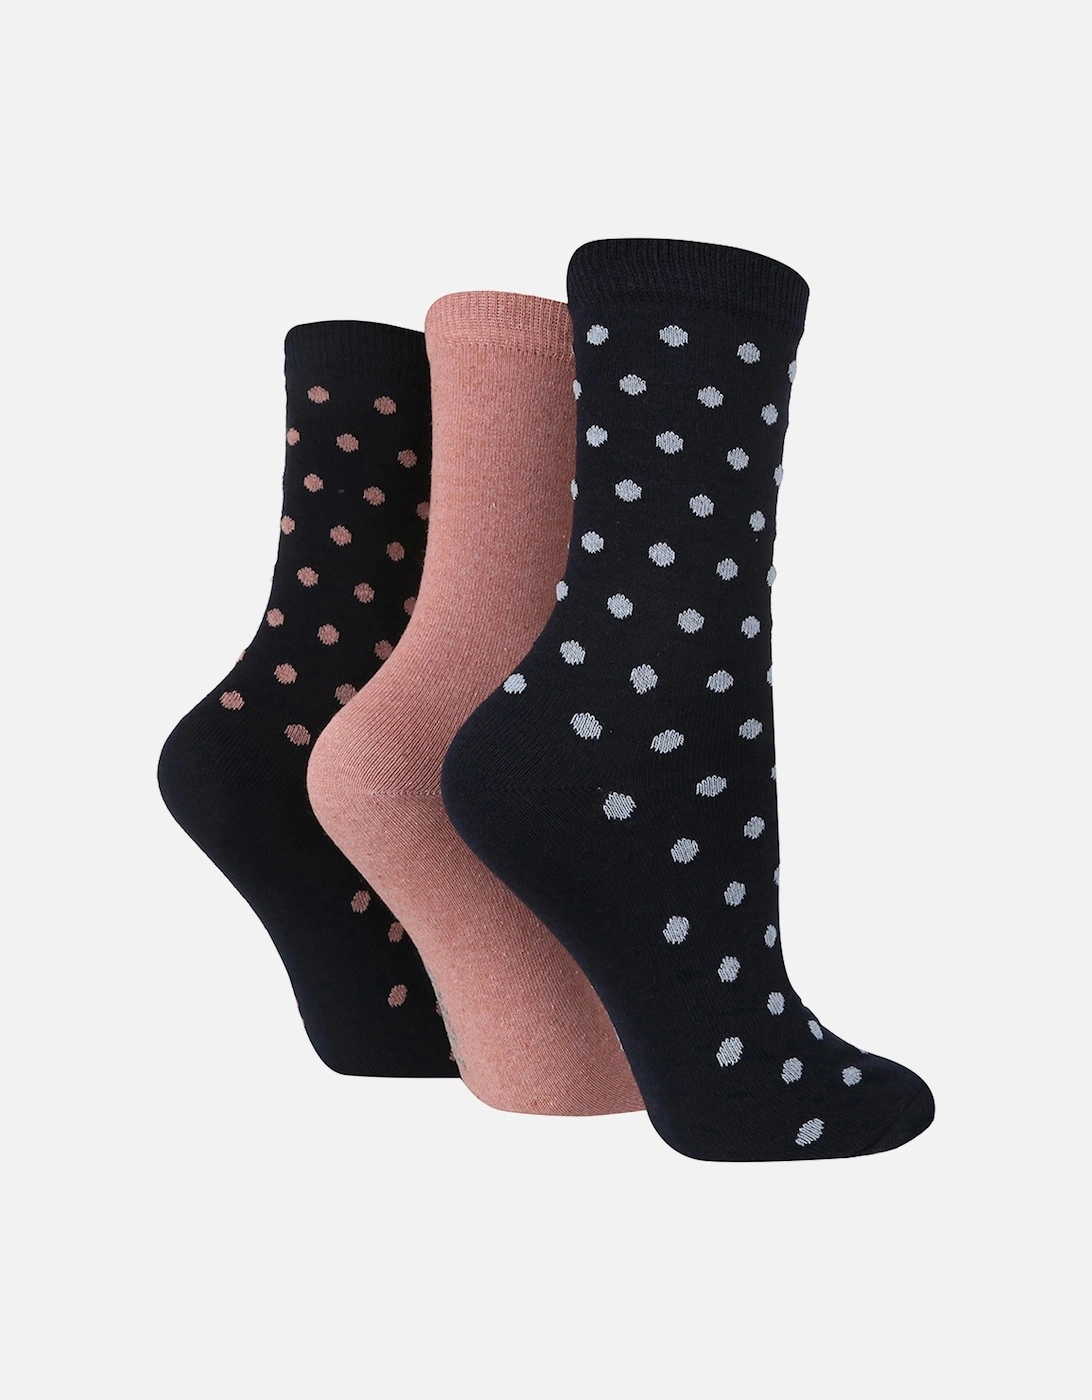 3 PAIR 100% RECYCLED LADIES SOCKS WITH SPOTS, 2 of 1